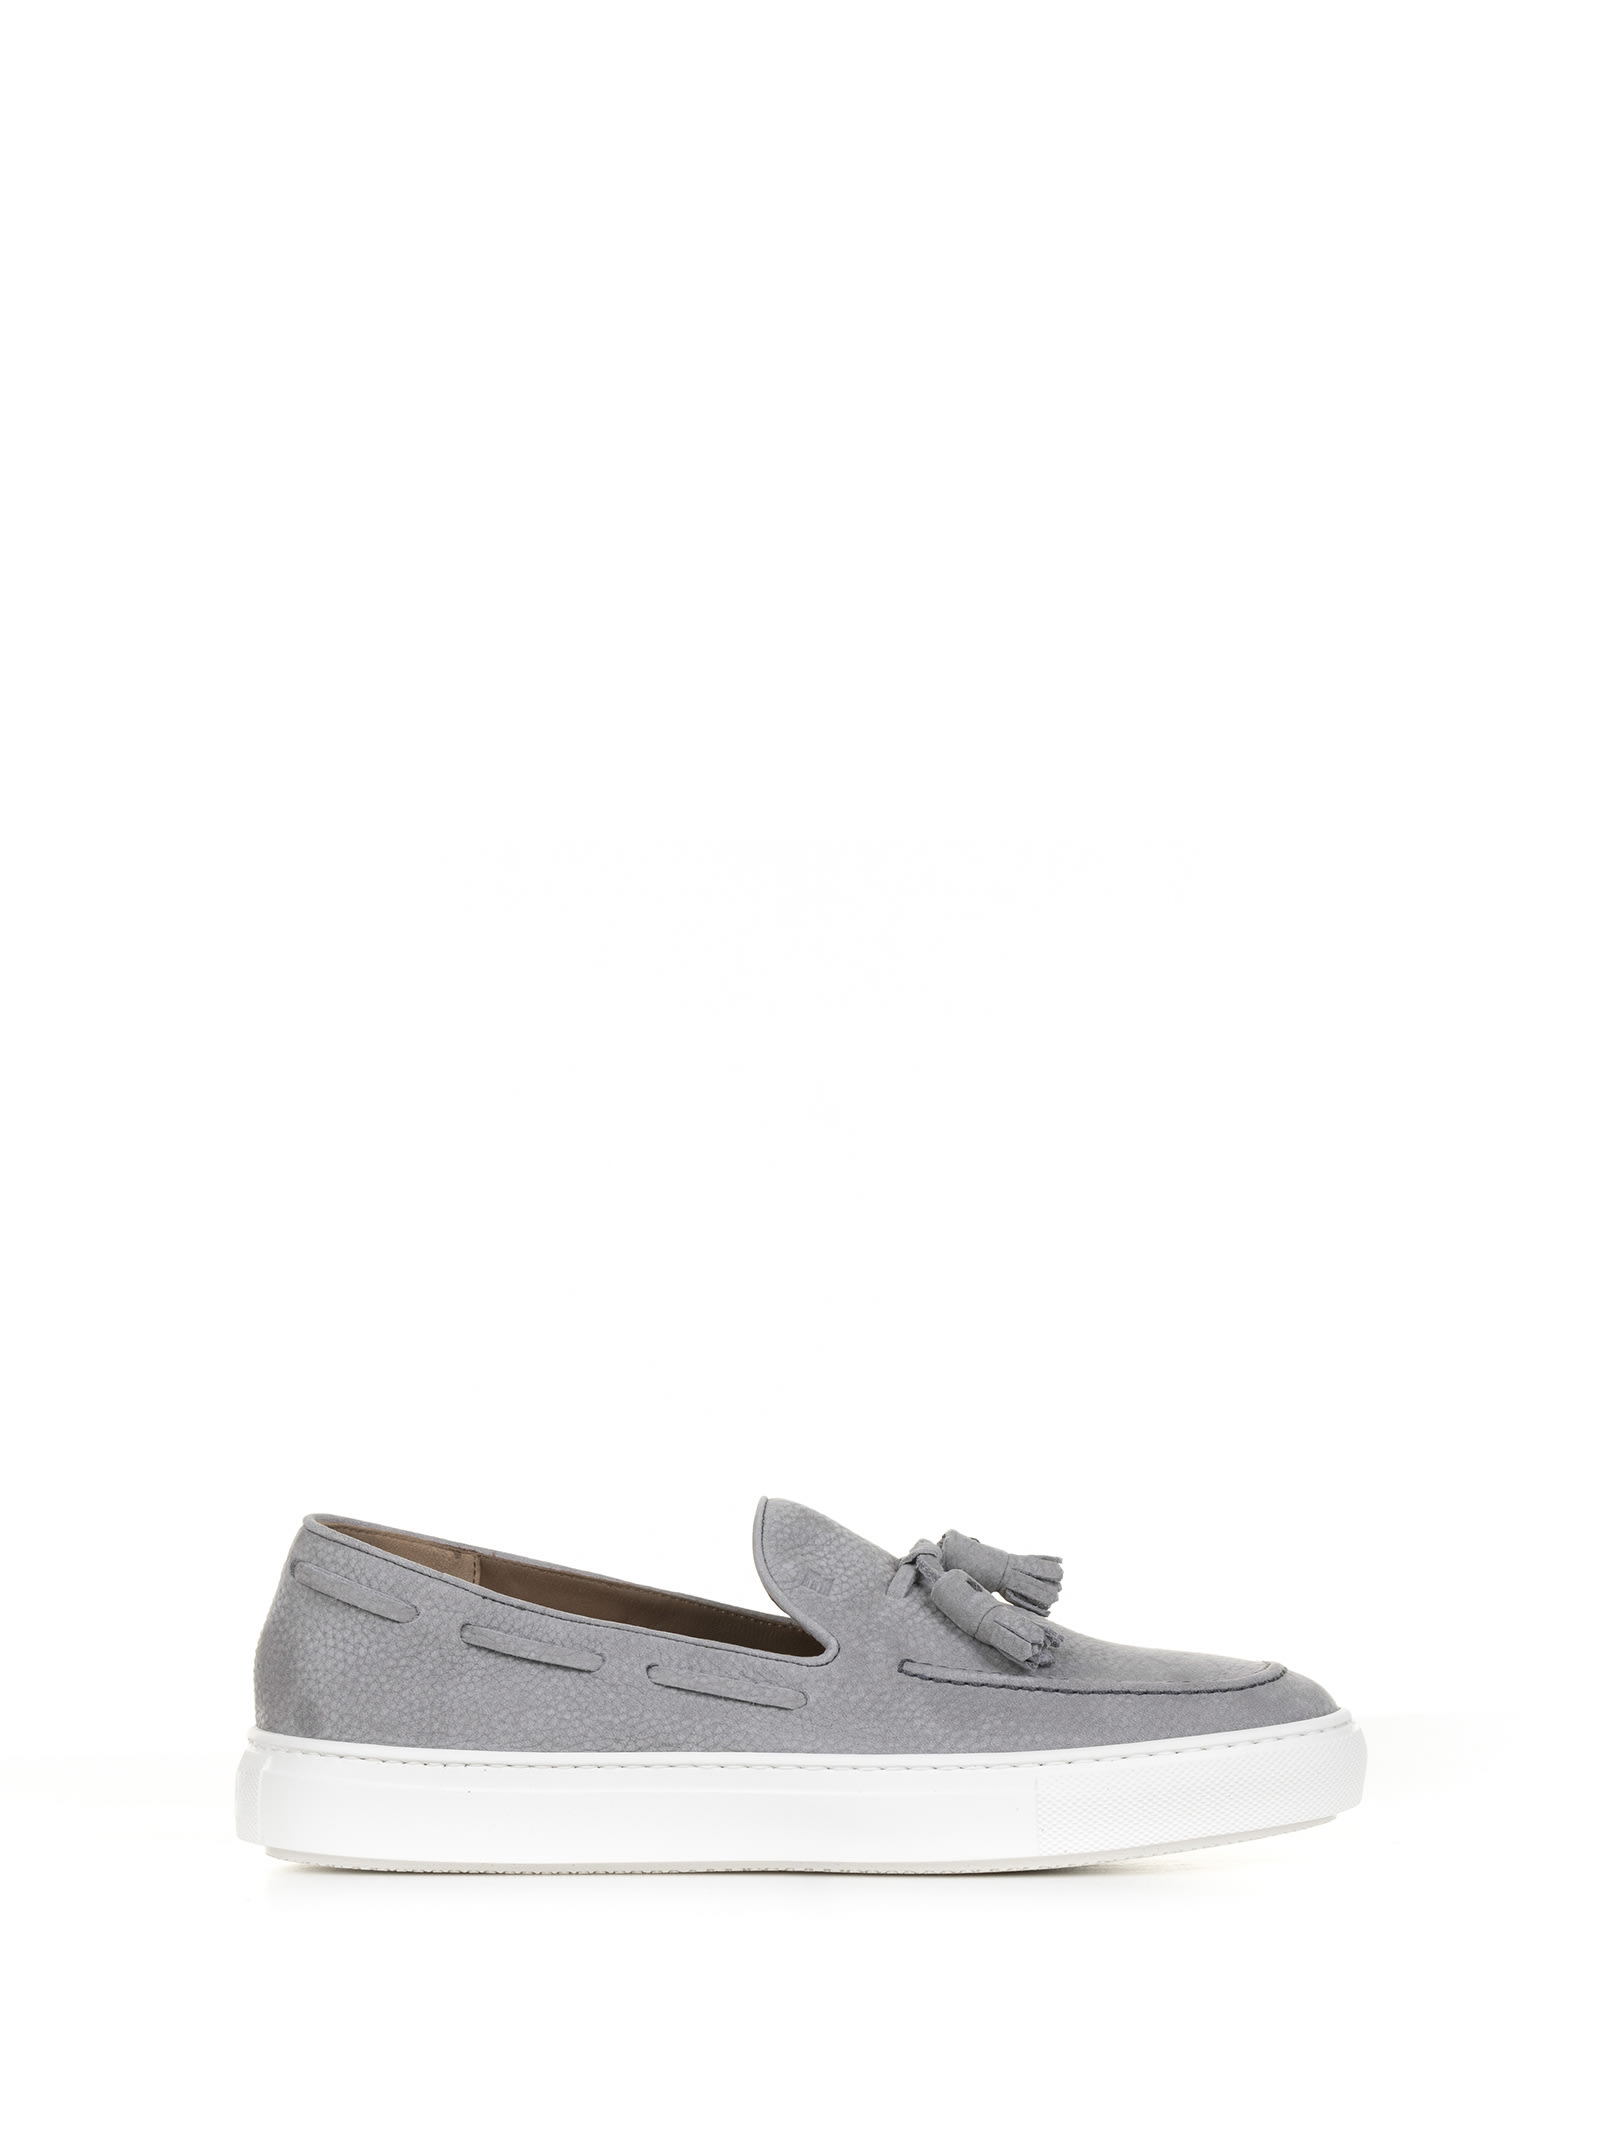 Moccasin In Gray Suede And Rubber Sole